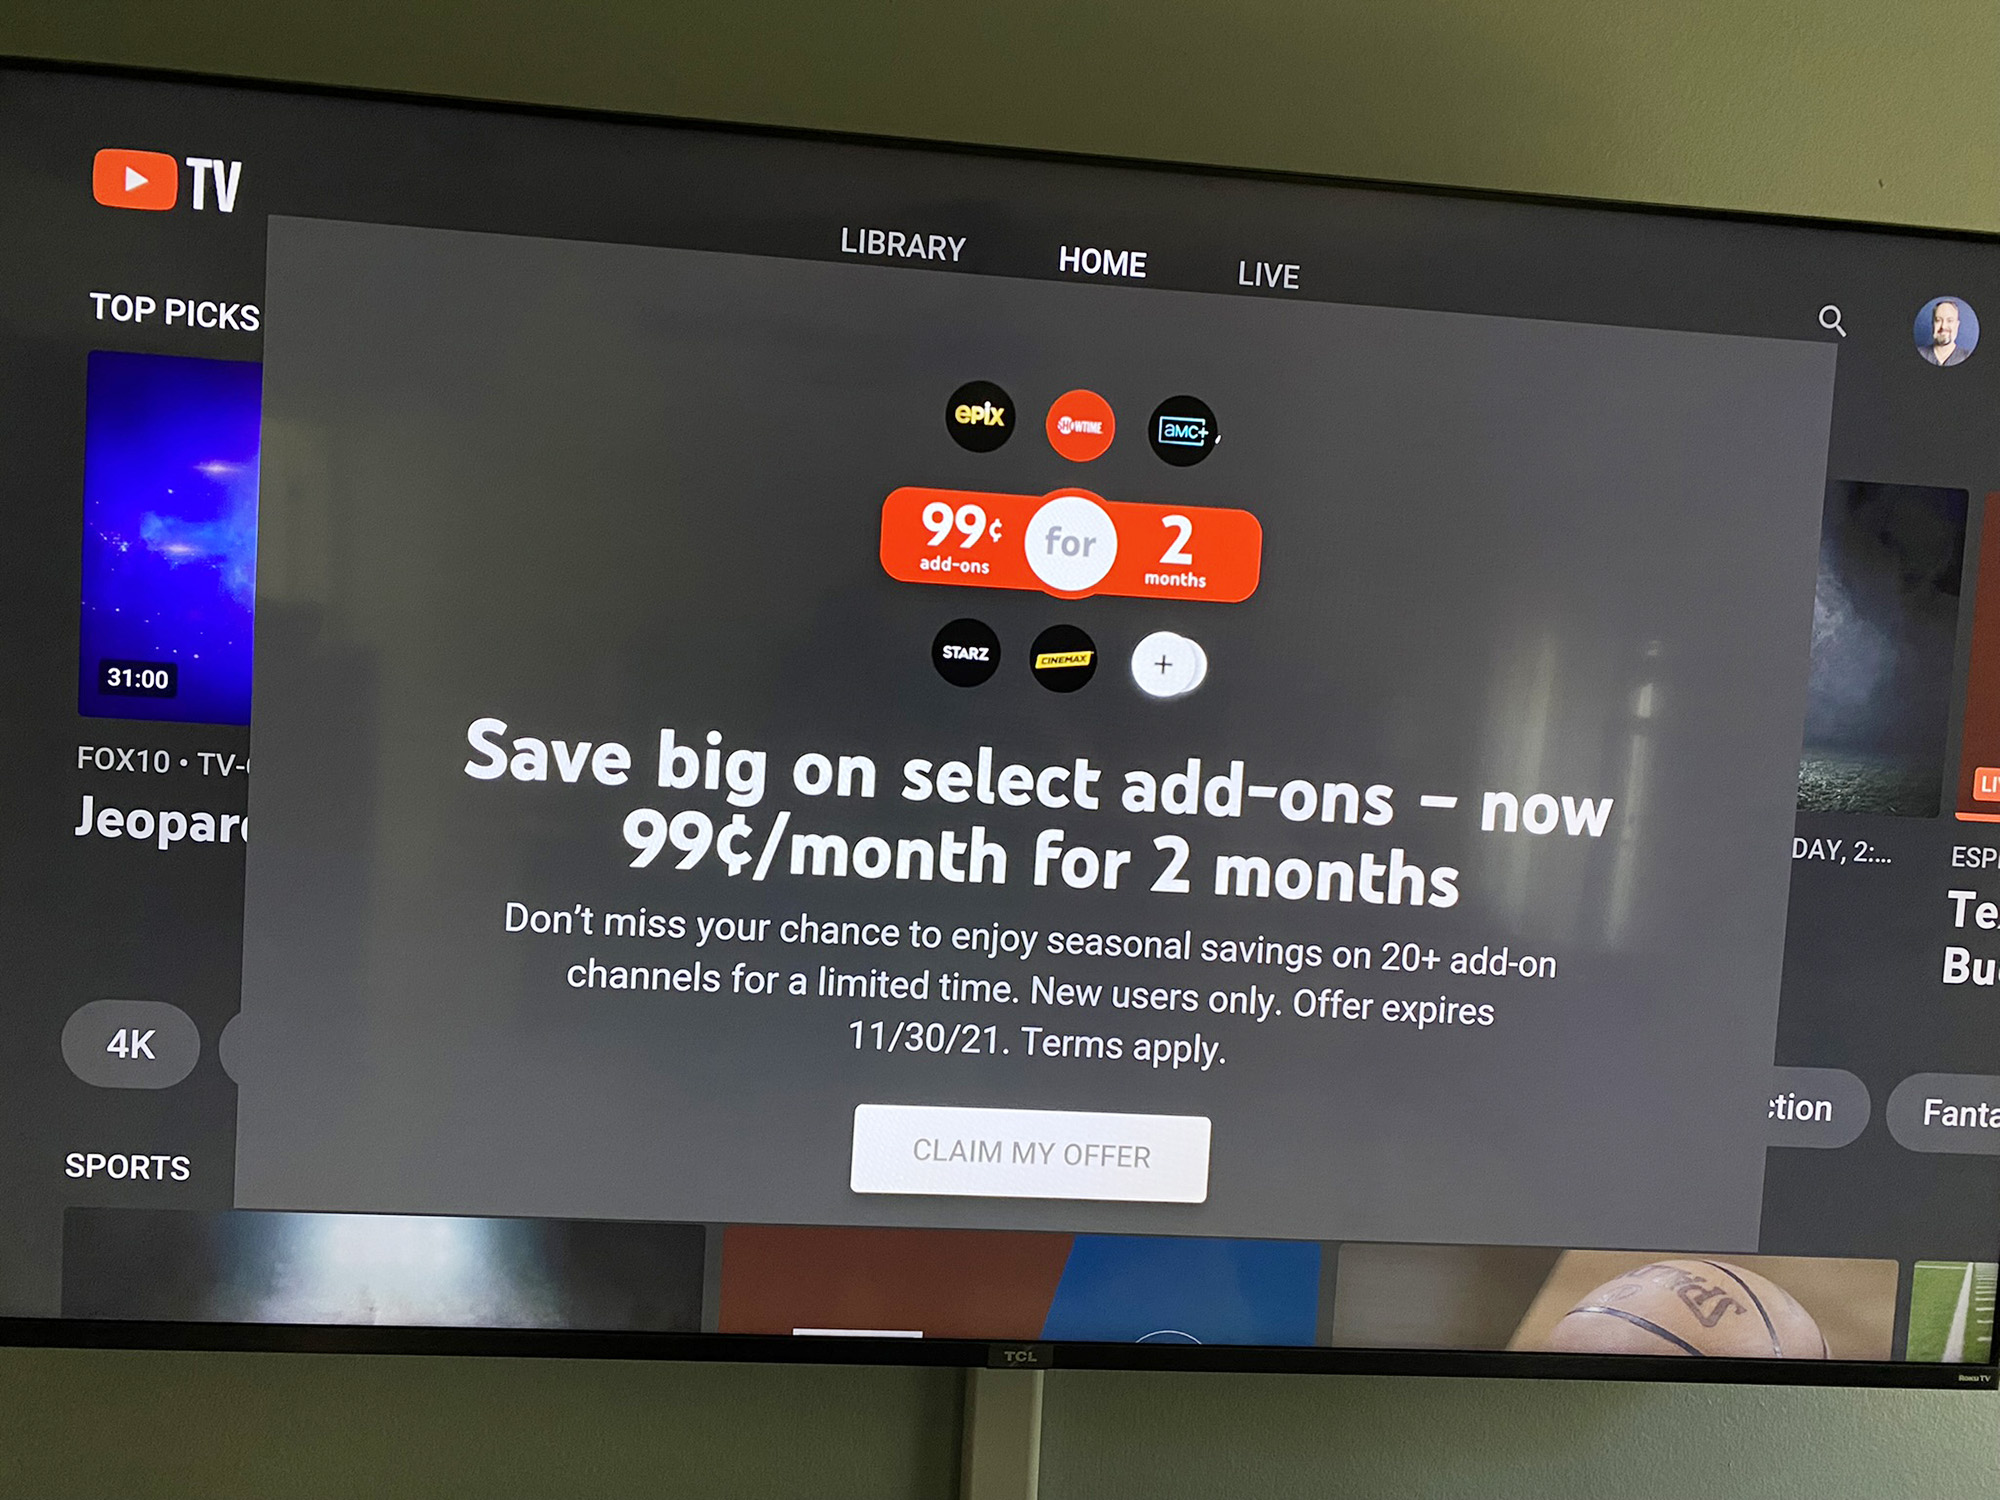 YouTube TV Offering A Number Of Add-Ons For $2 For 2 Months Digital Trends